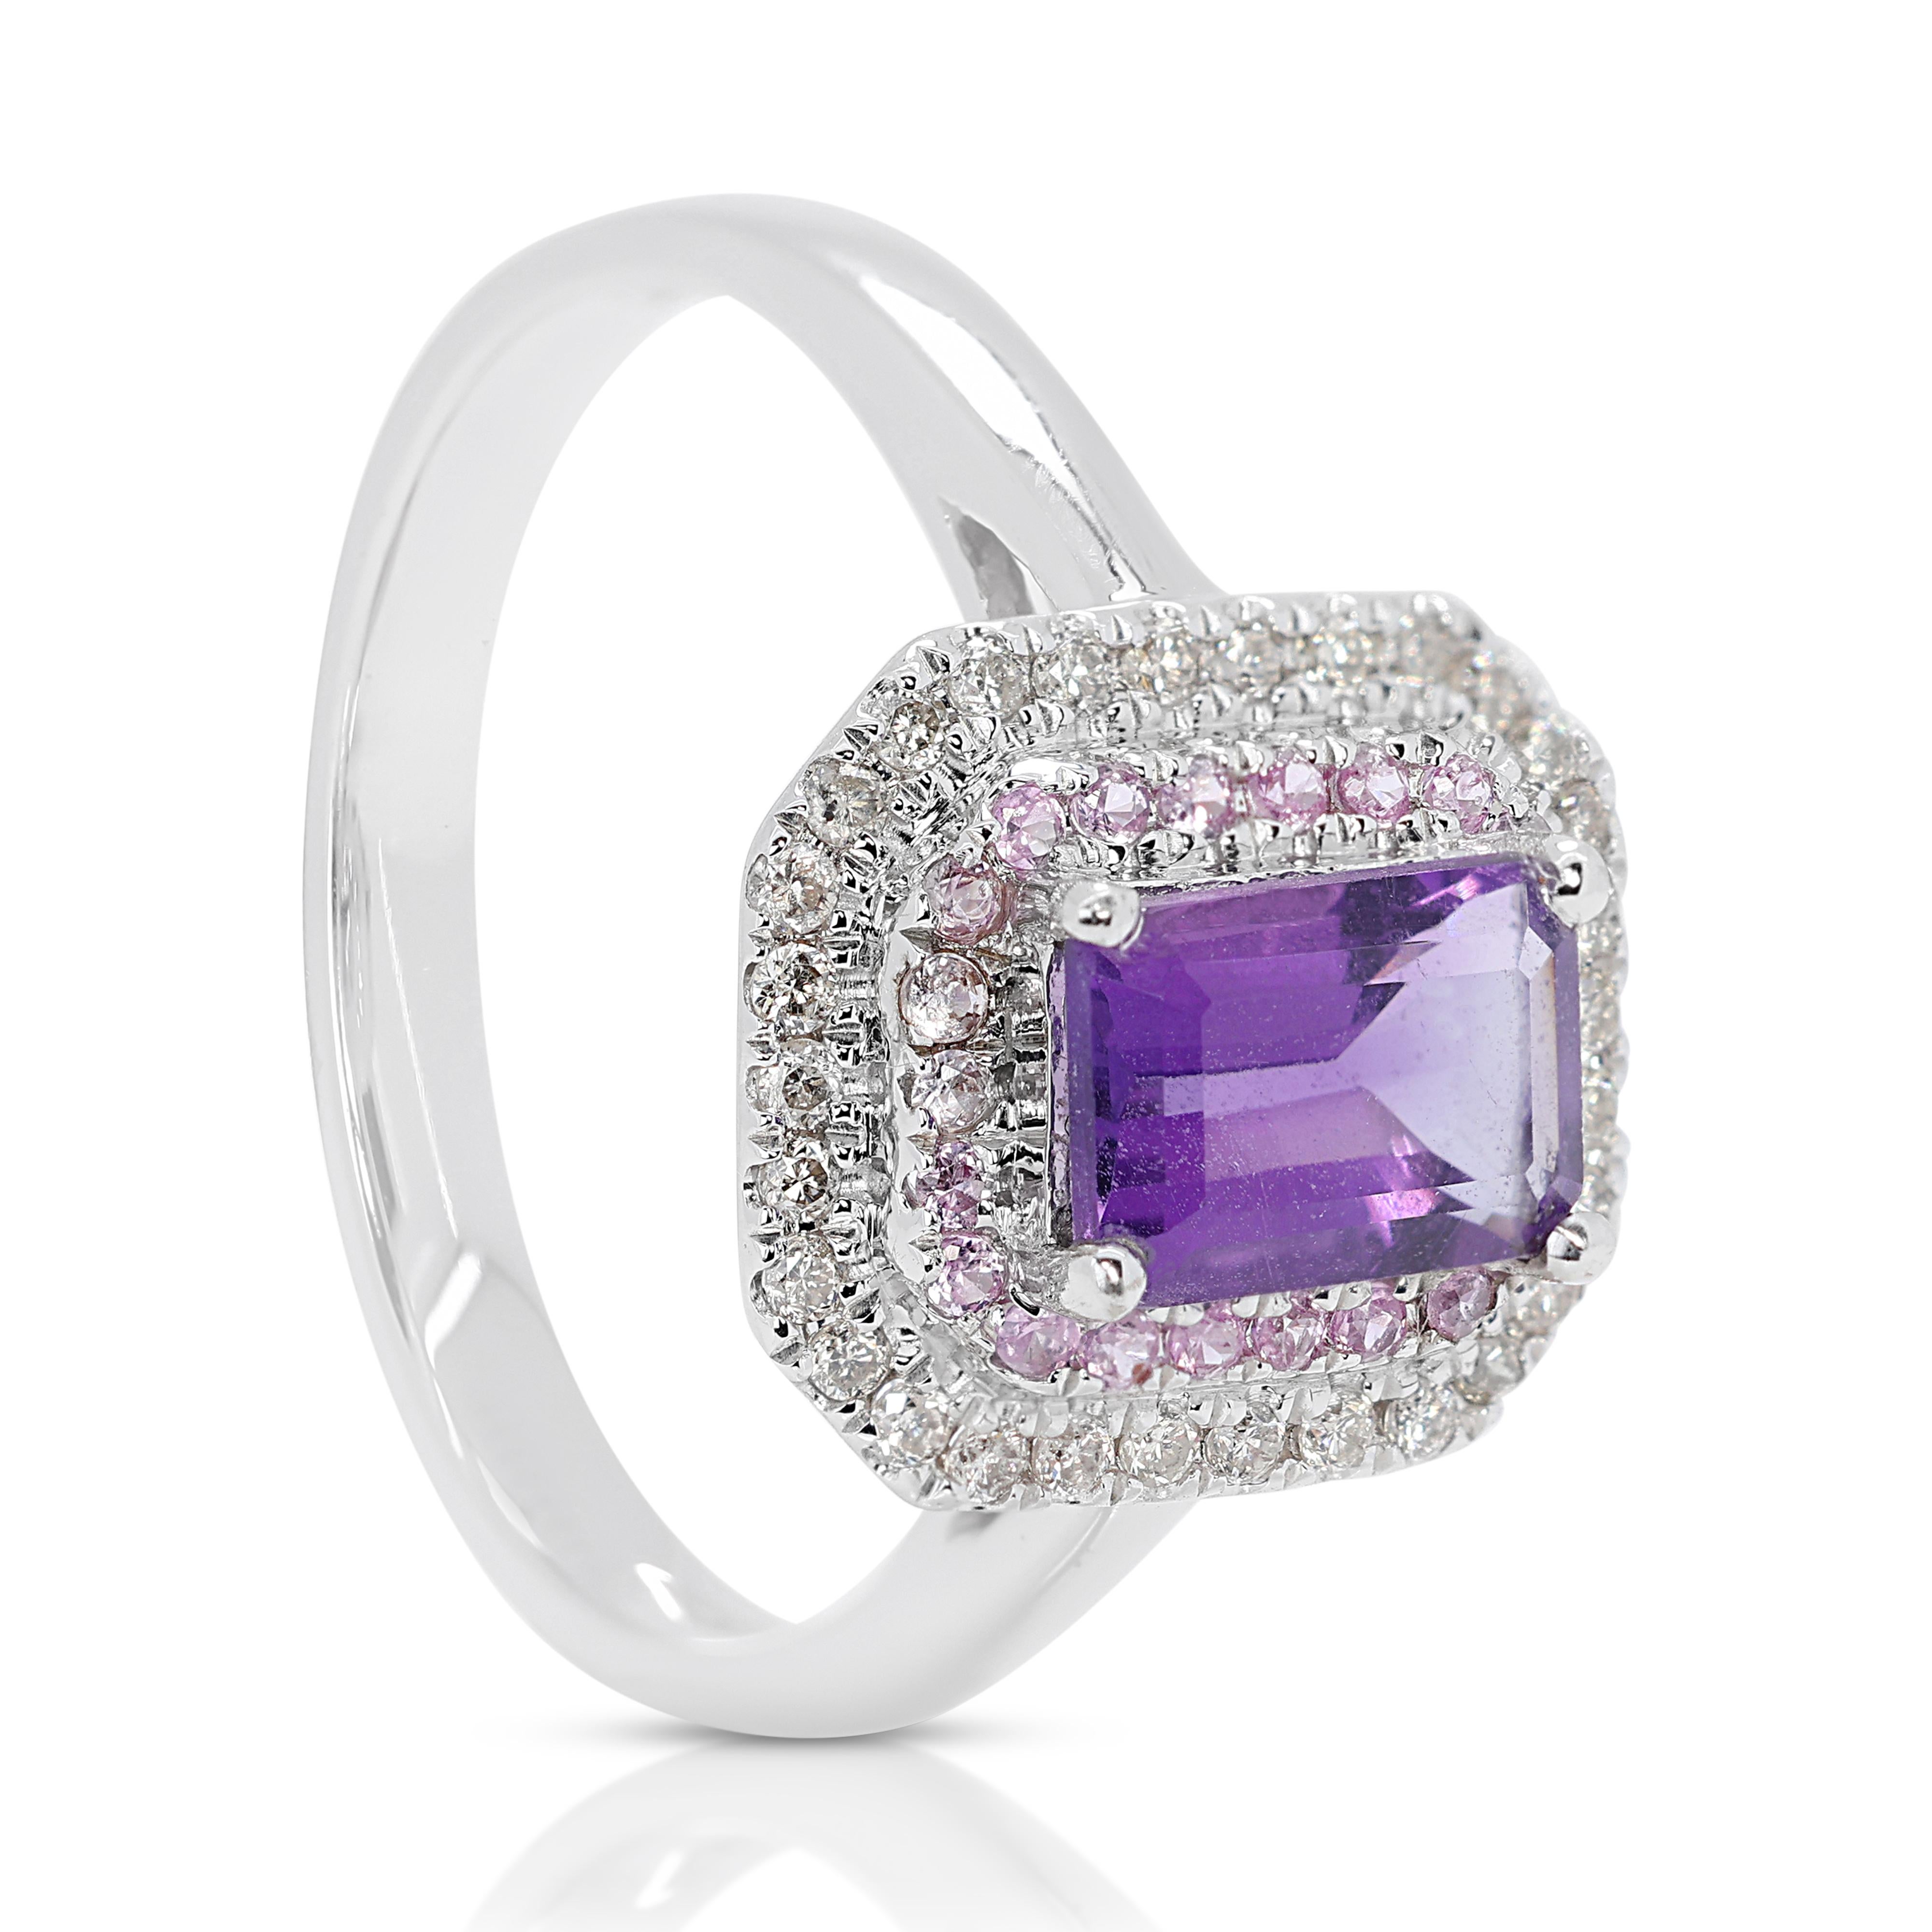 Stunning 1.35ct Amethyst Double Halo Ring with Gemstones and Diamonds 1